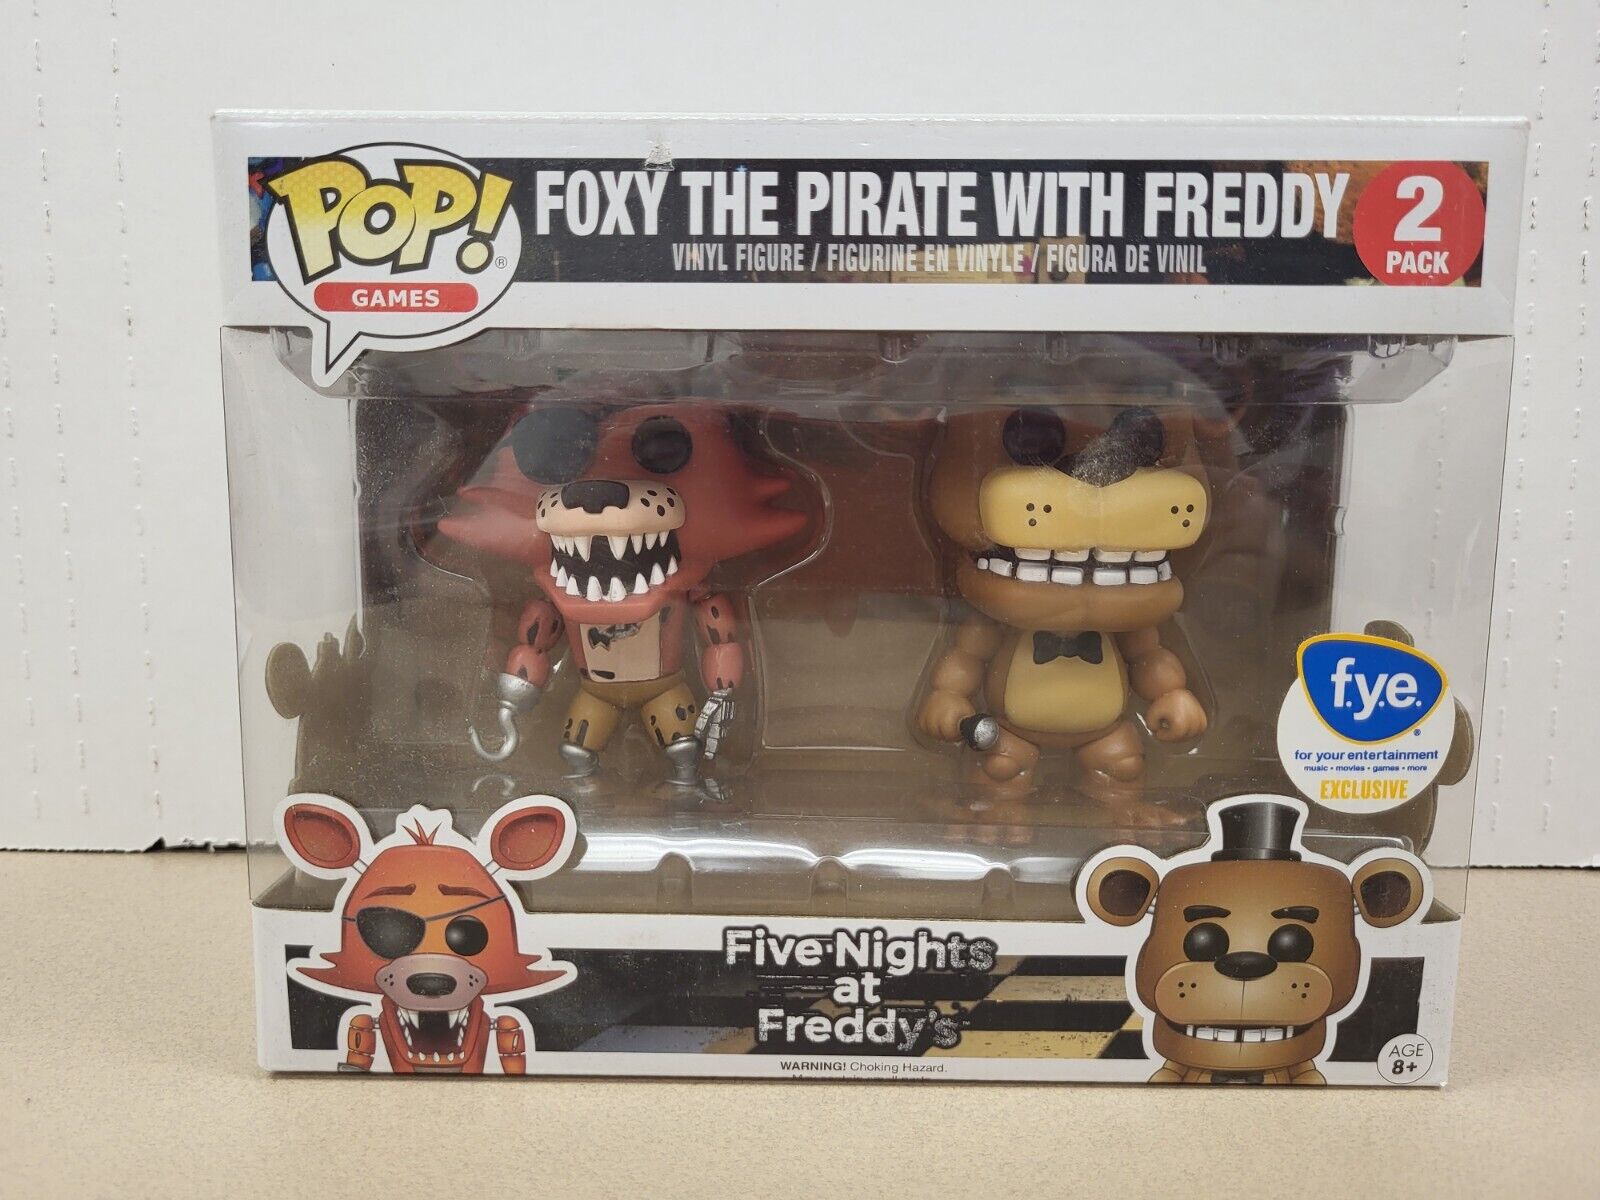 Funko Pop Games Five Nights at Freddy\'s 2 Pack Foxy the Pirate w/ Freddy FYE Exc